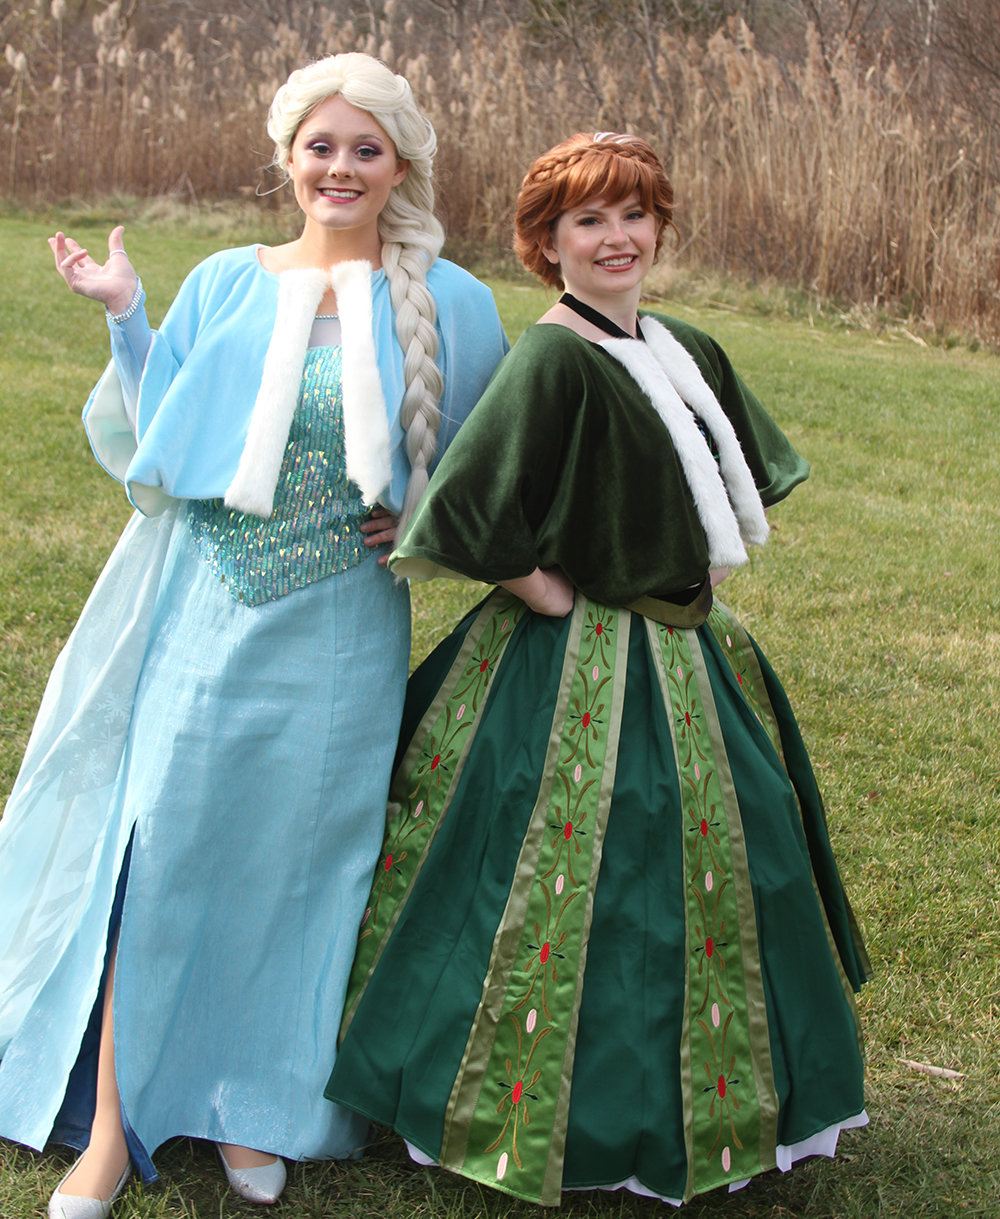 Elsa (Rory Myles) and Anna (Jessica Downing) of Frozen greeted young visitors on Nov. 21 at Highland’s Lilly Rae in the Hamlet.